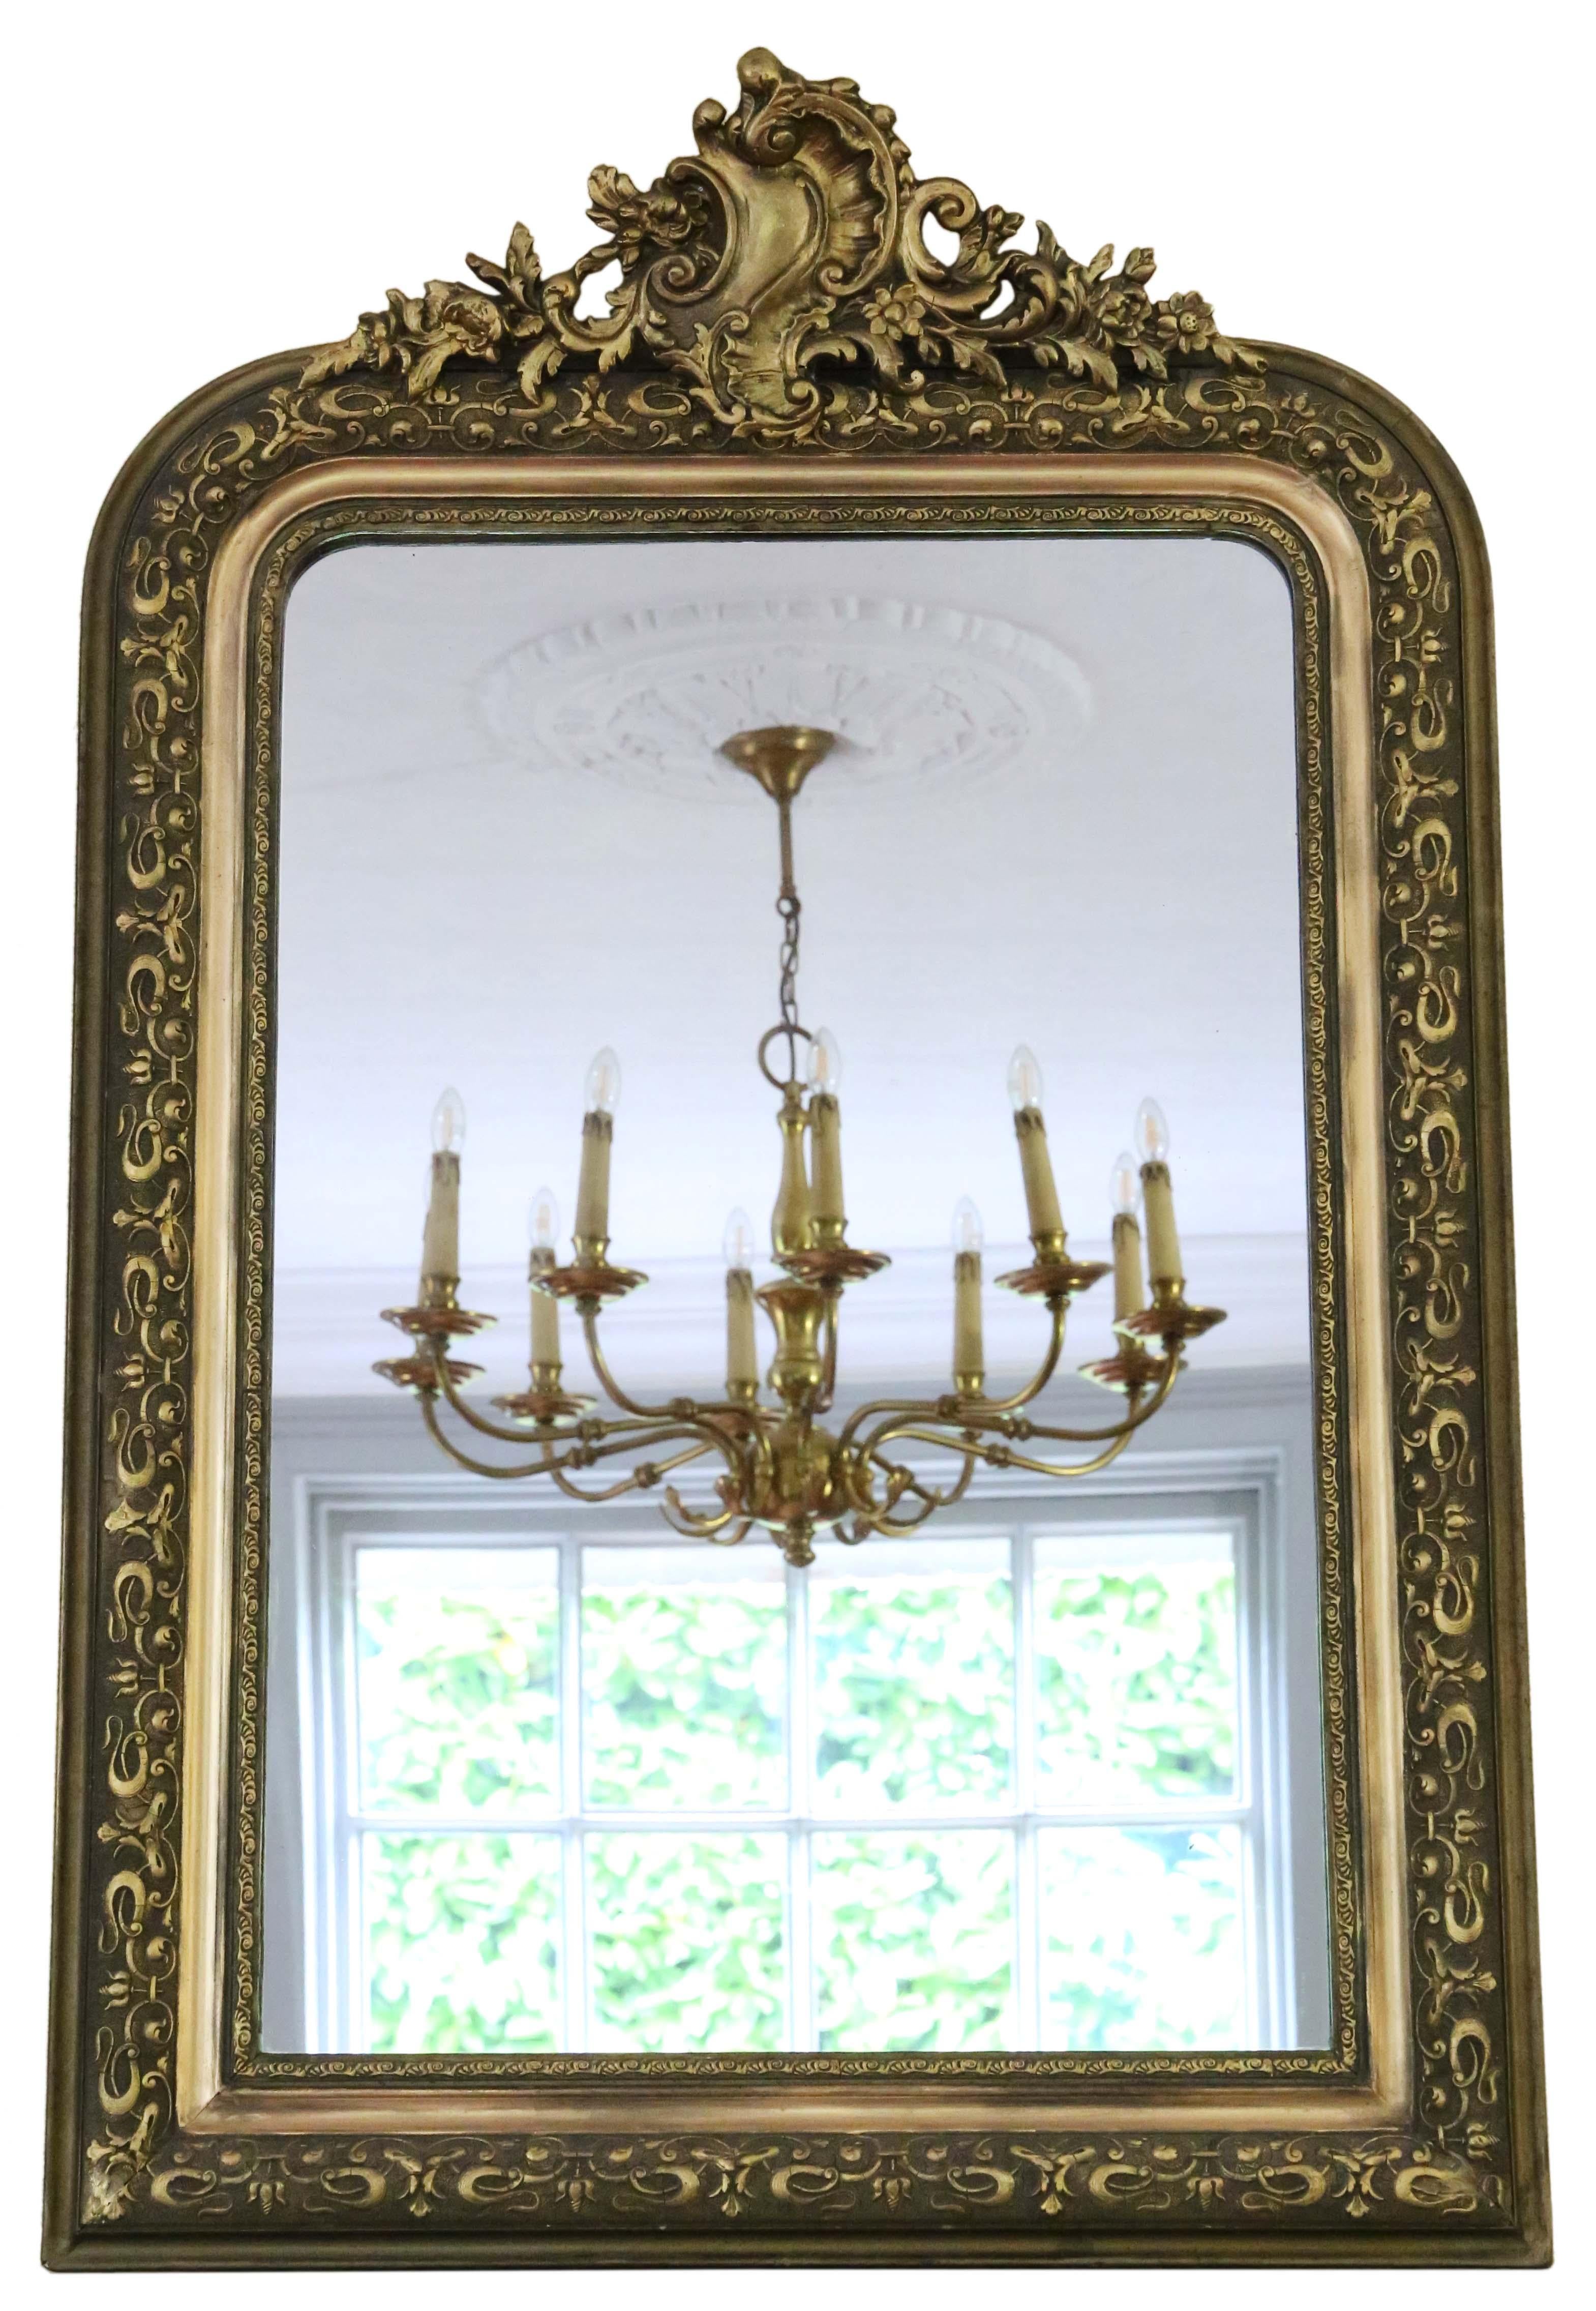 Antique shaped 19th Century large quality gilt overmantle or wall mirror. Lovely charm and elegance. Original finish with minor losses, refinishing and touching up.

This is a lovely, rare mirror. A bit different and quite special.

An impressive